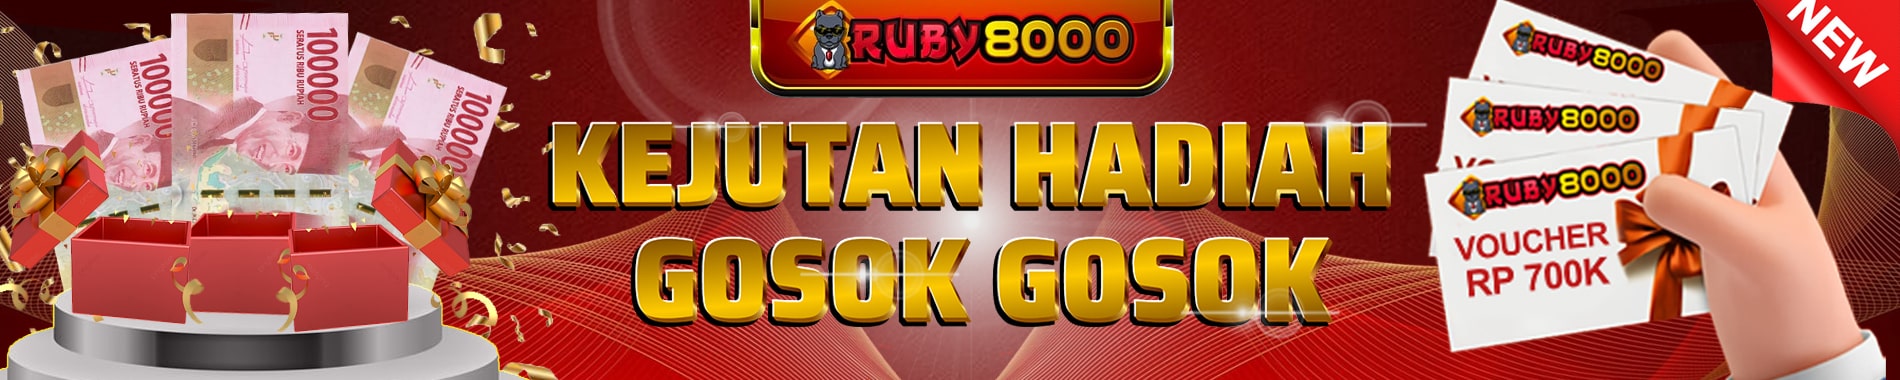 event ruby8000